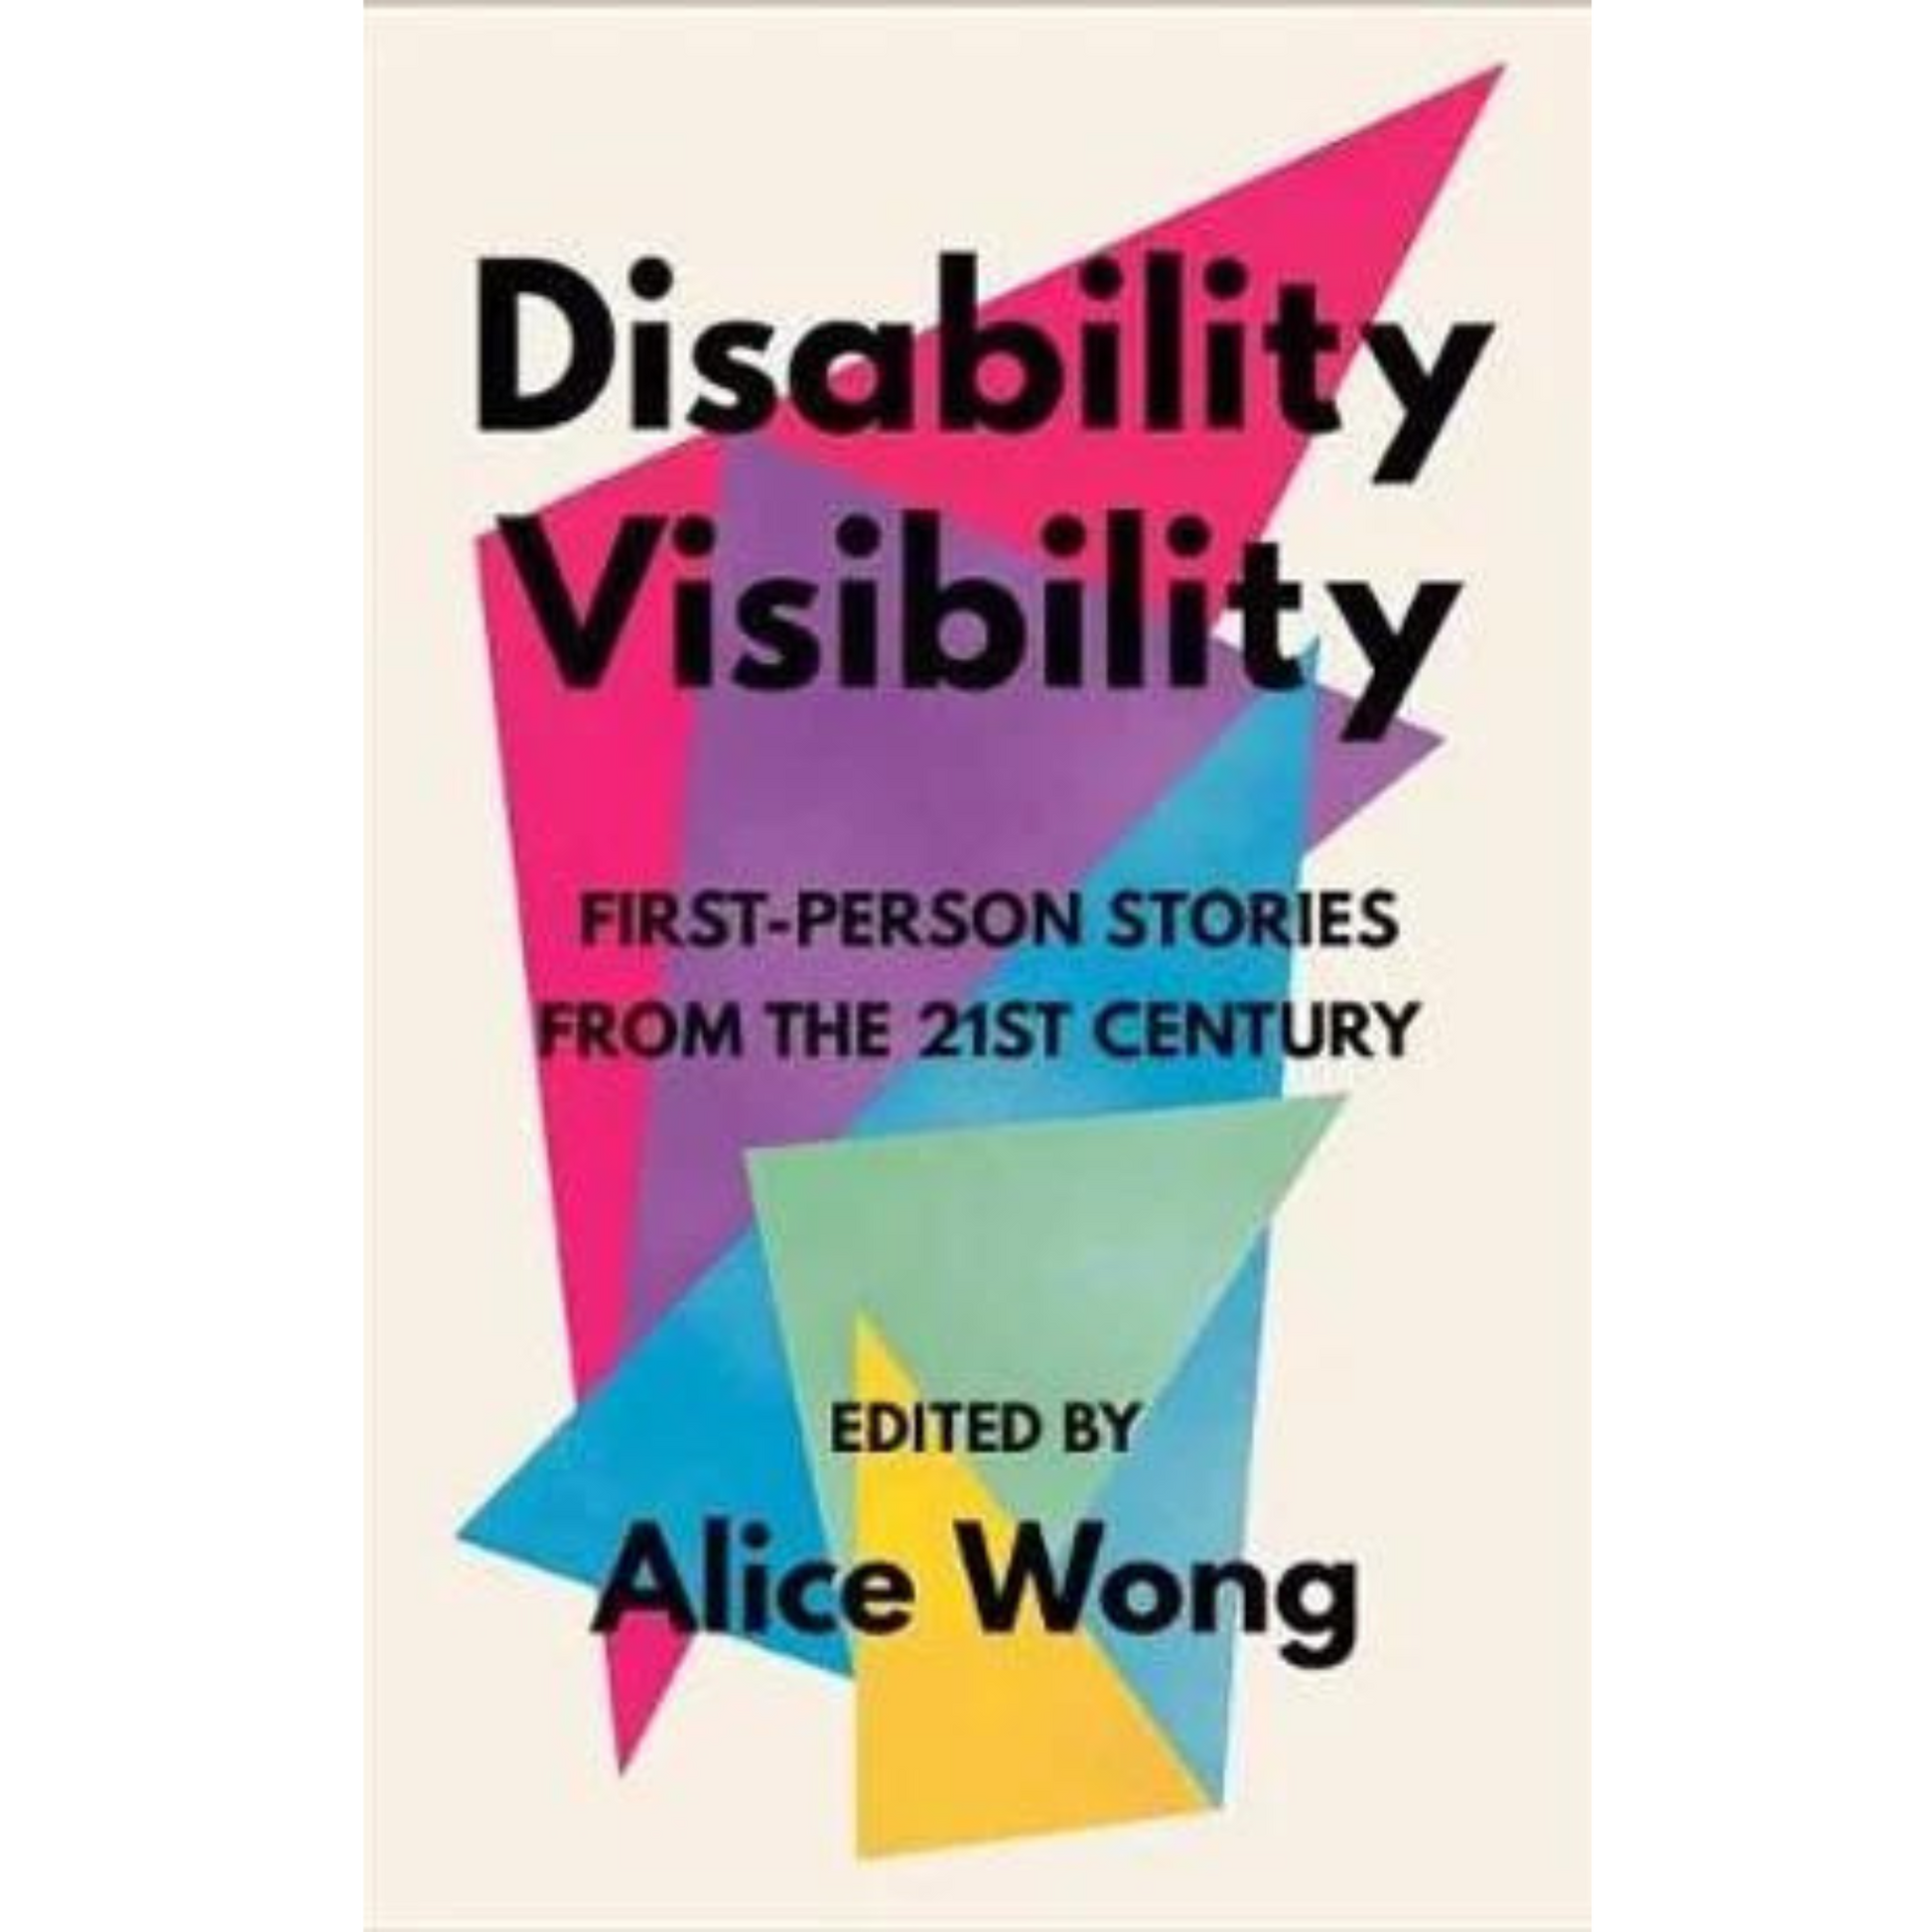 Book_Disability_Visibility_First_Person_Stories_from_the_21st_Century_Edited_by_Alice_Wong